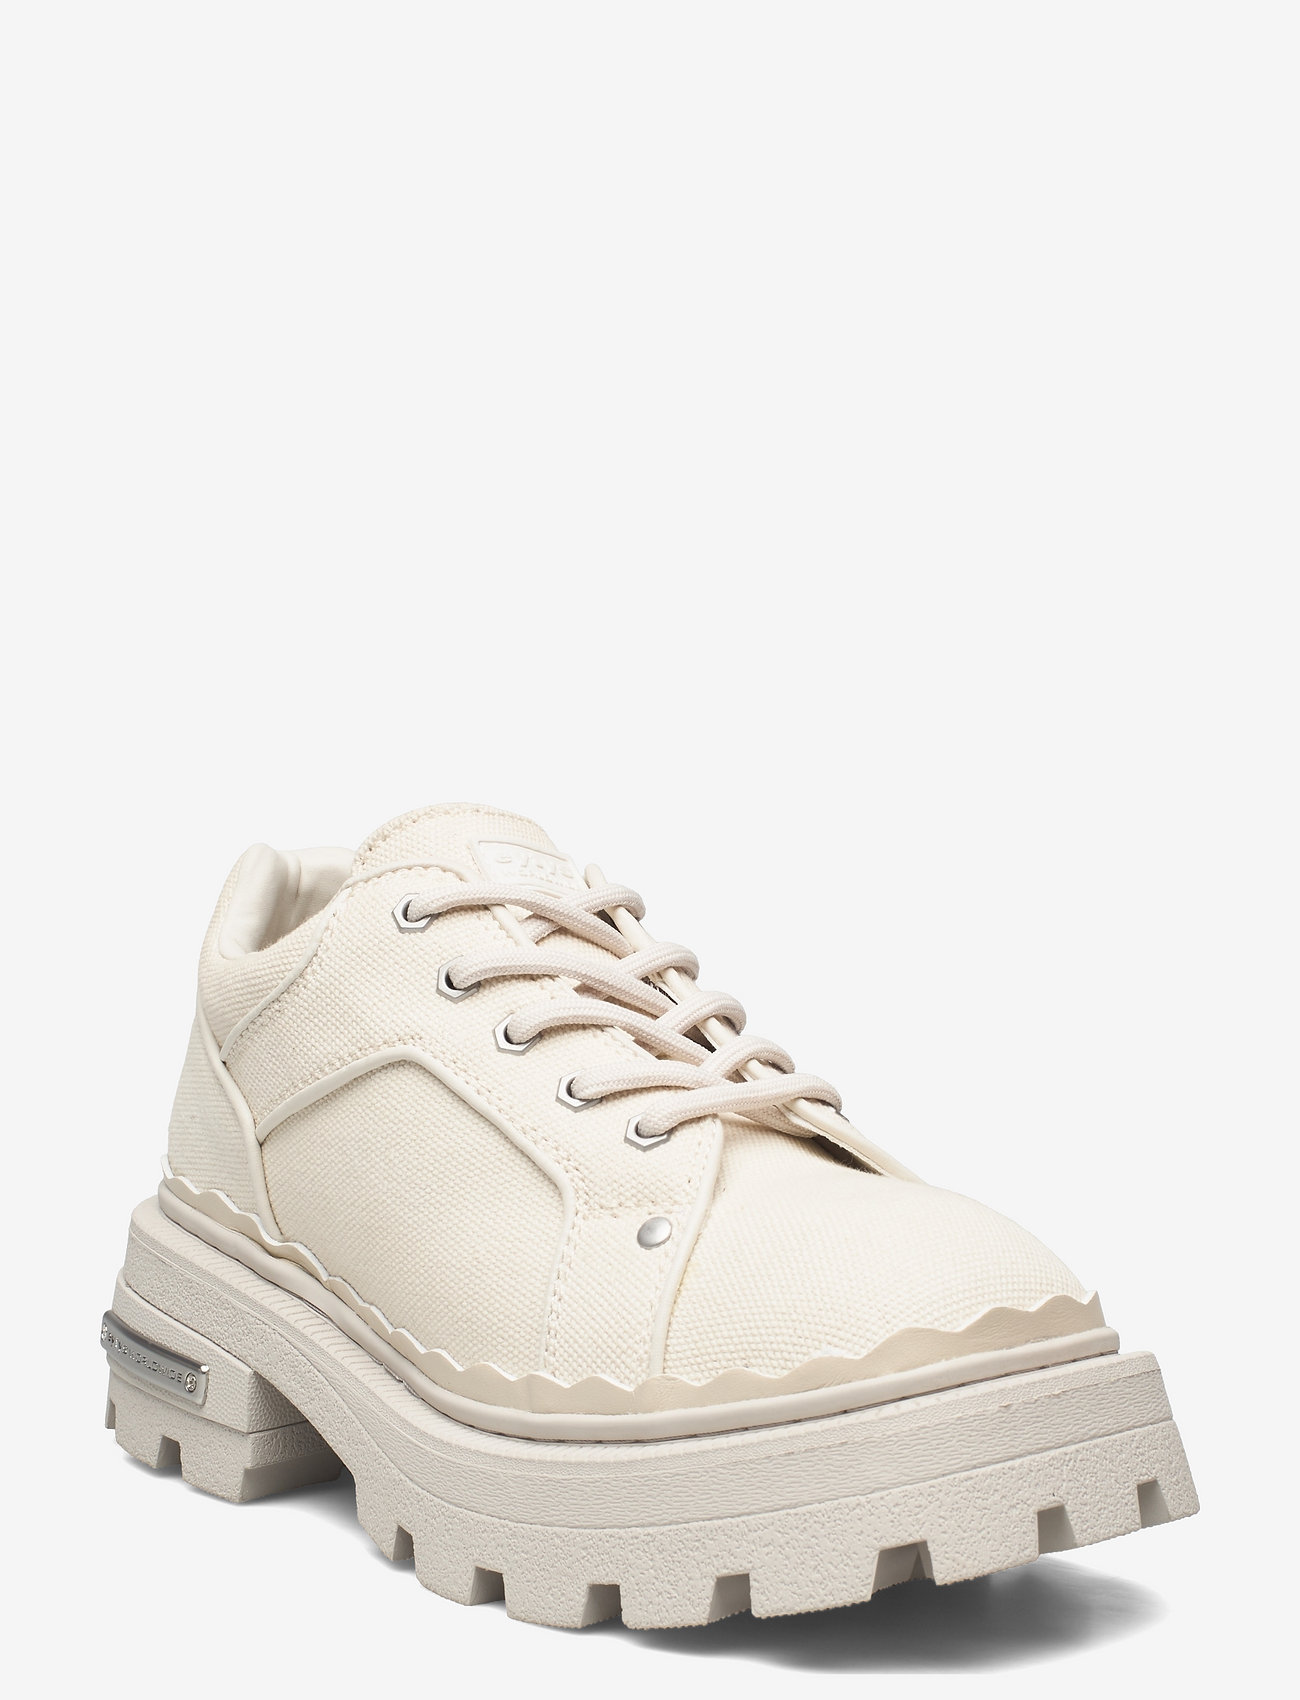 Eytys Detroit Off White - Low top sneakers | Boozt.com